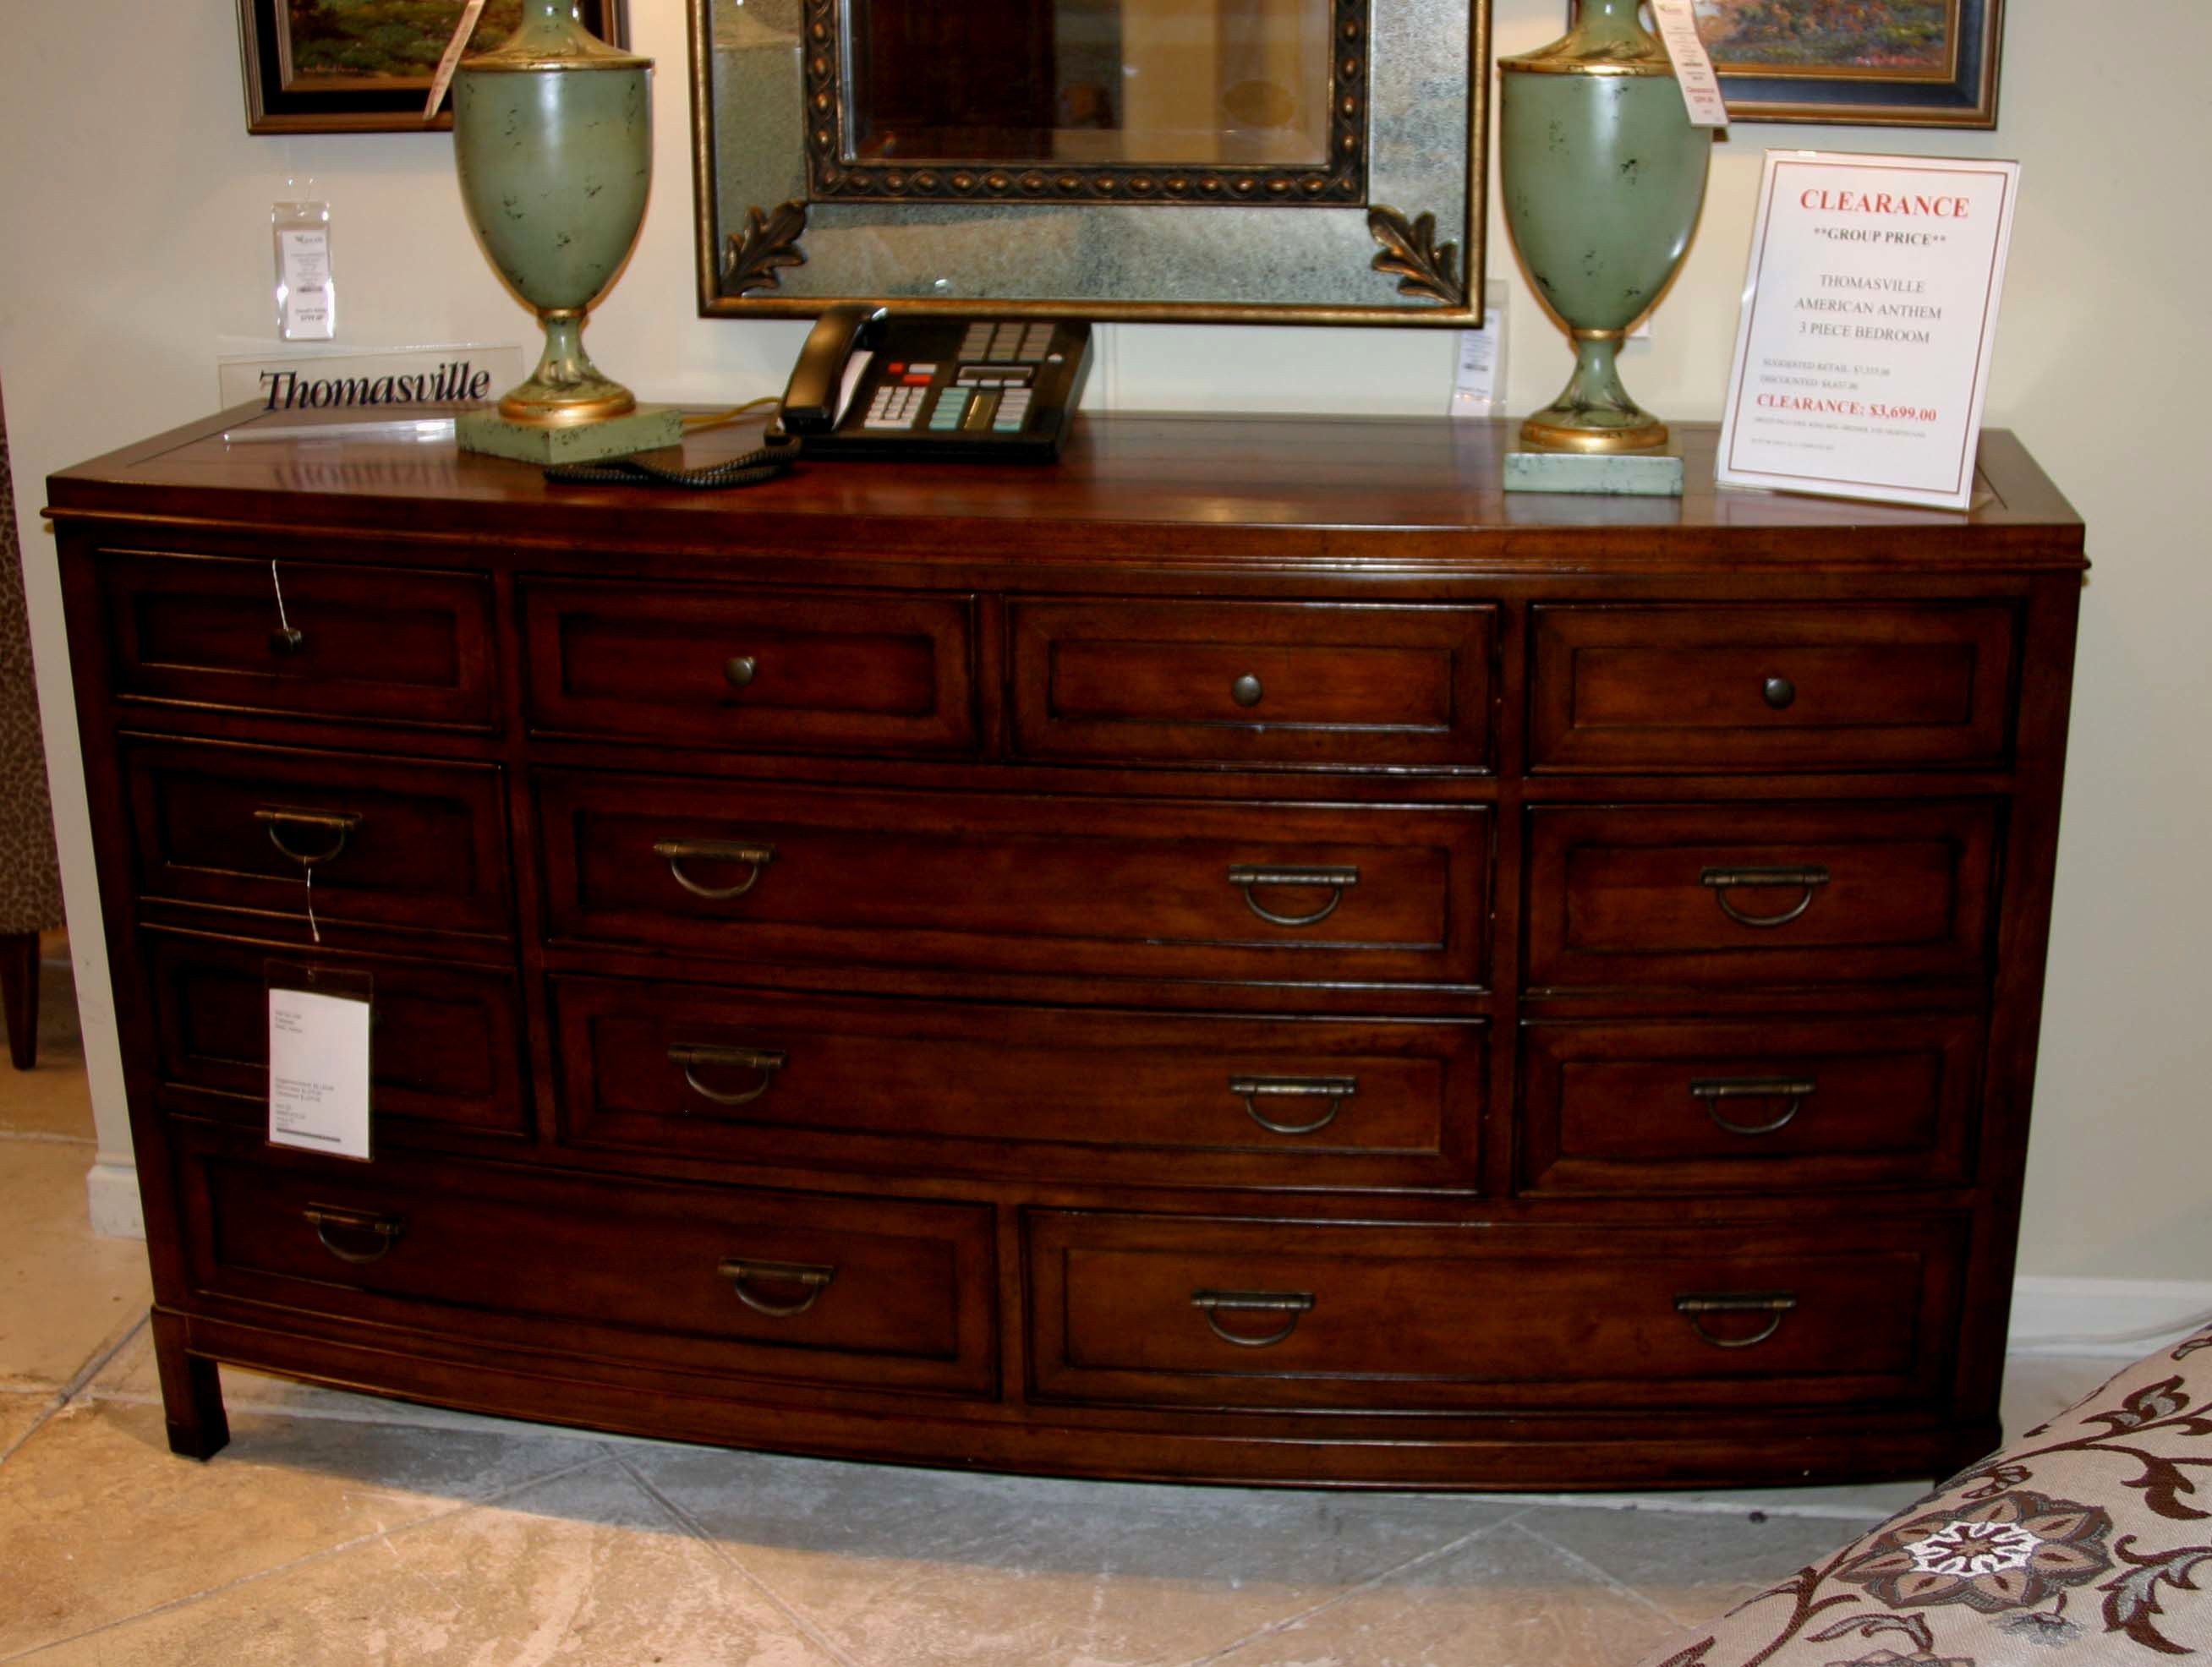 old thomasville bedroom furniture collections